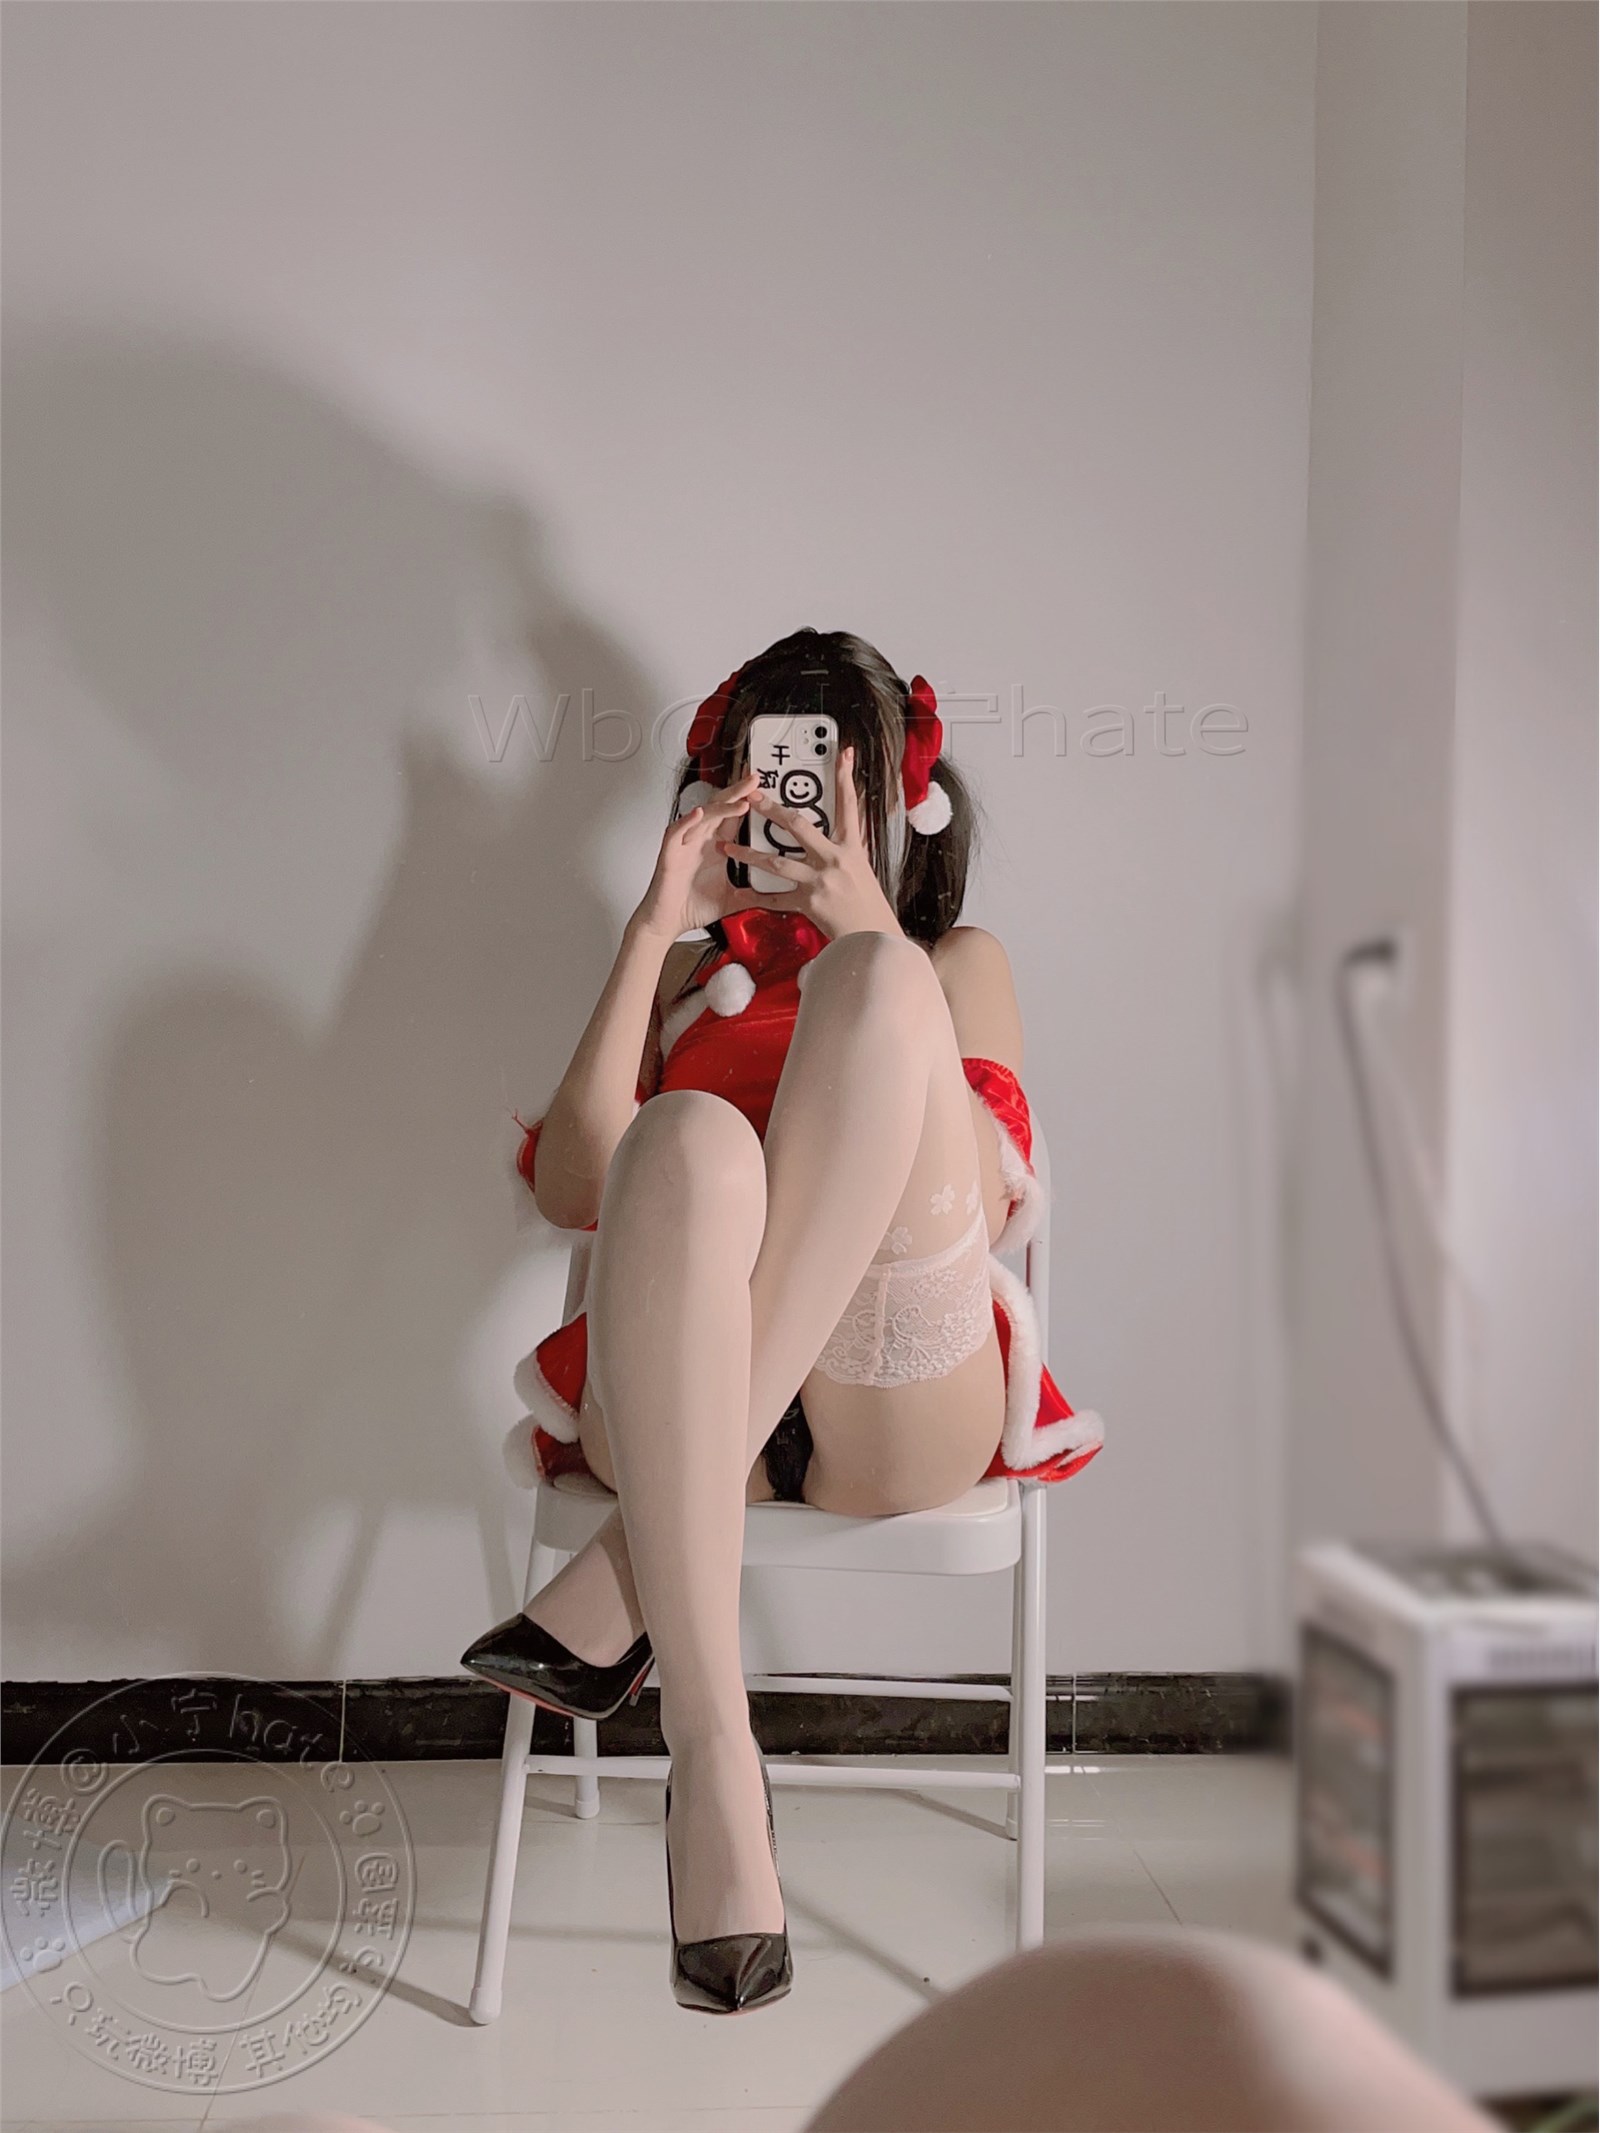 Xiaoning Hate (Ningjiang) Collection of Christmas Images from January to April 2023(11)